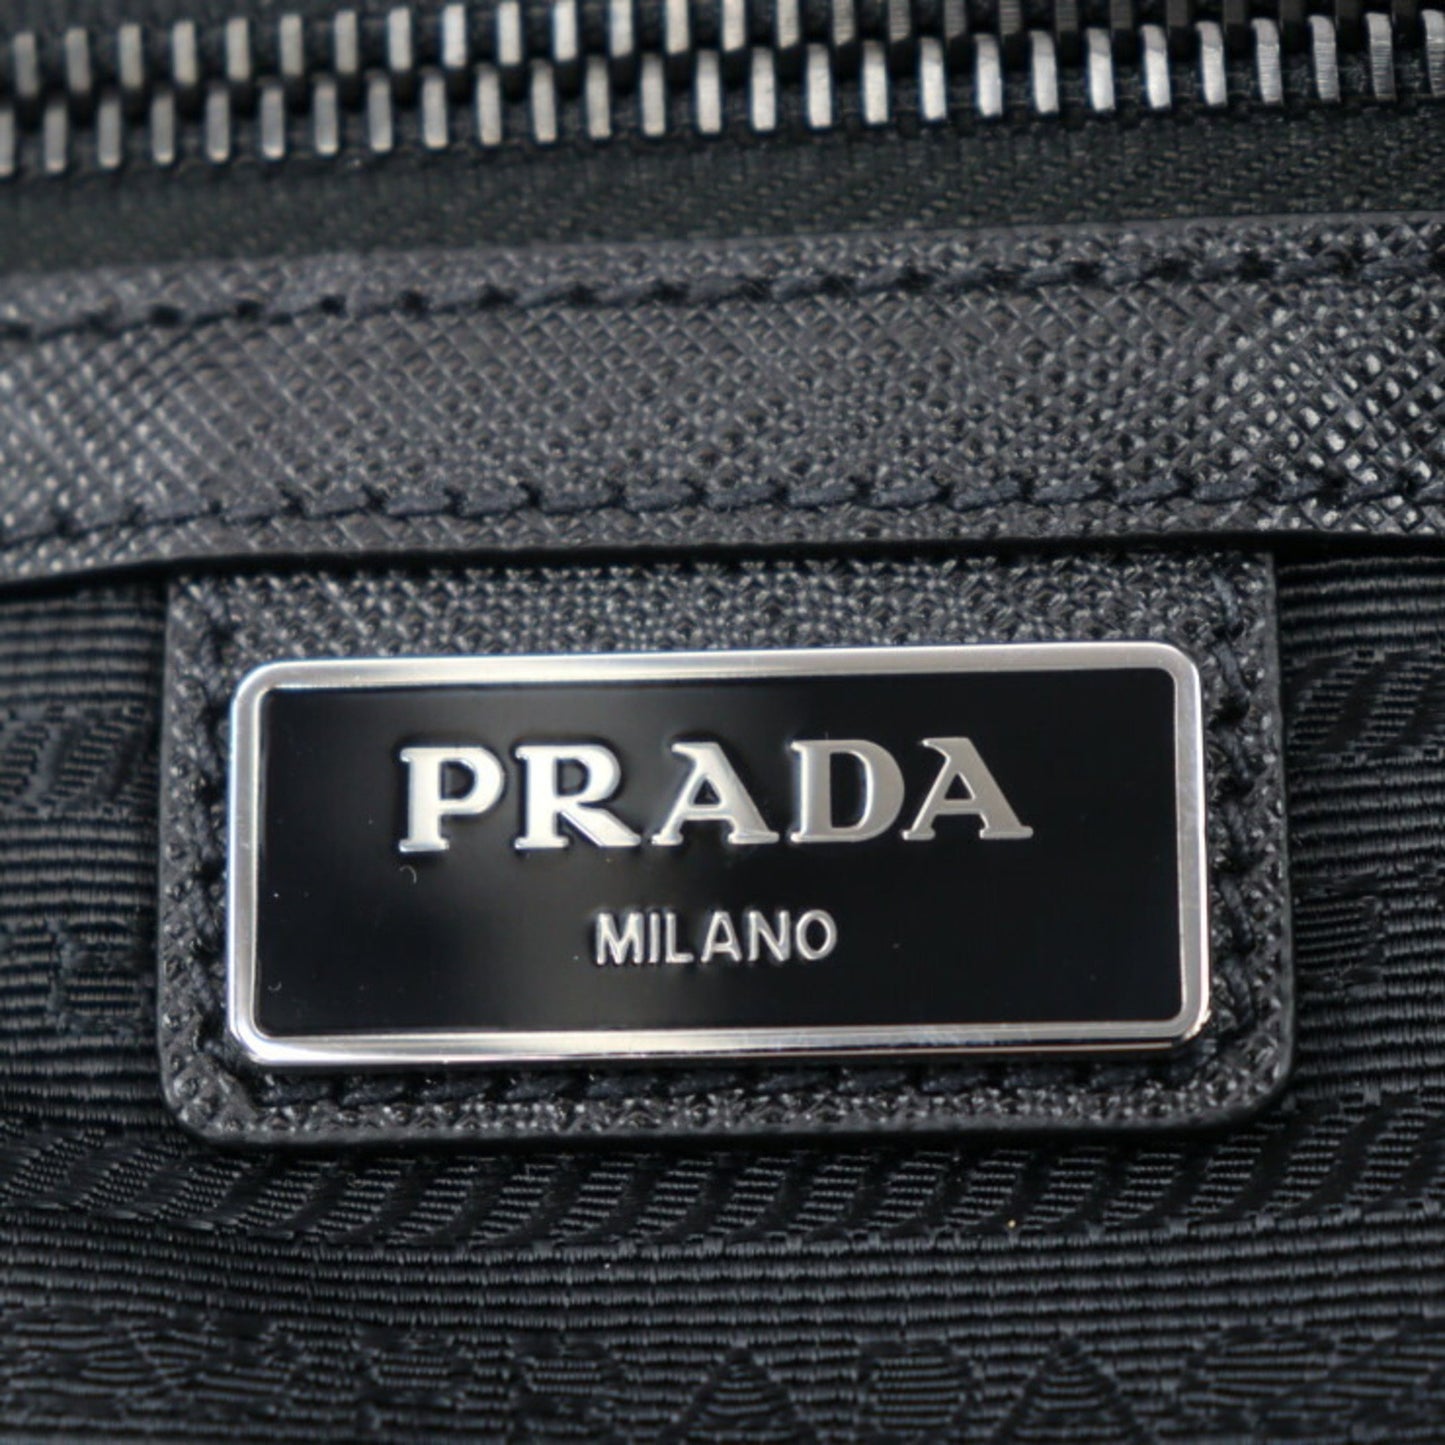 Prada Women's Contemporary Black Tote Bag for Ethical Fashion in Black